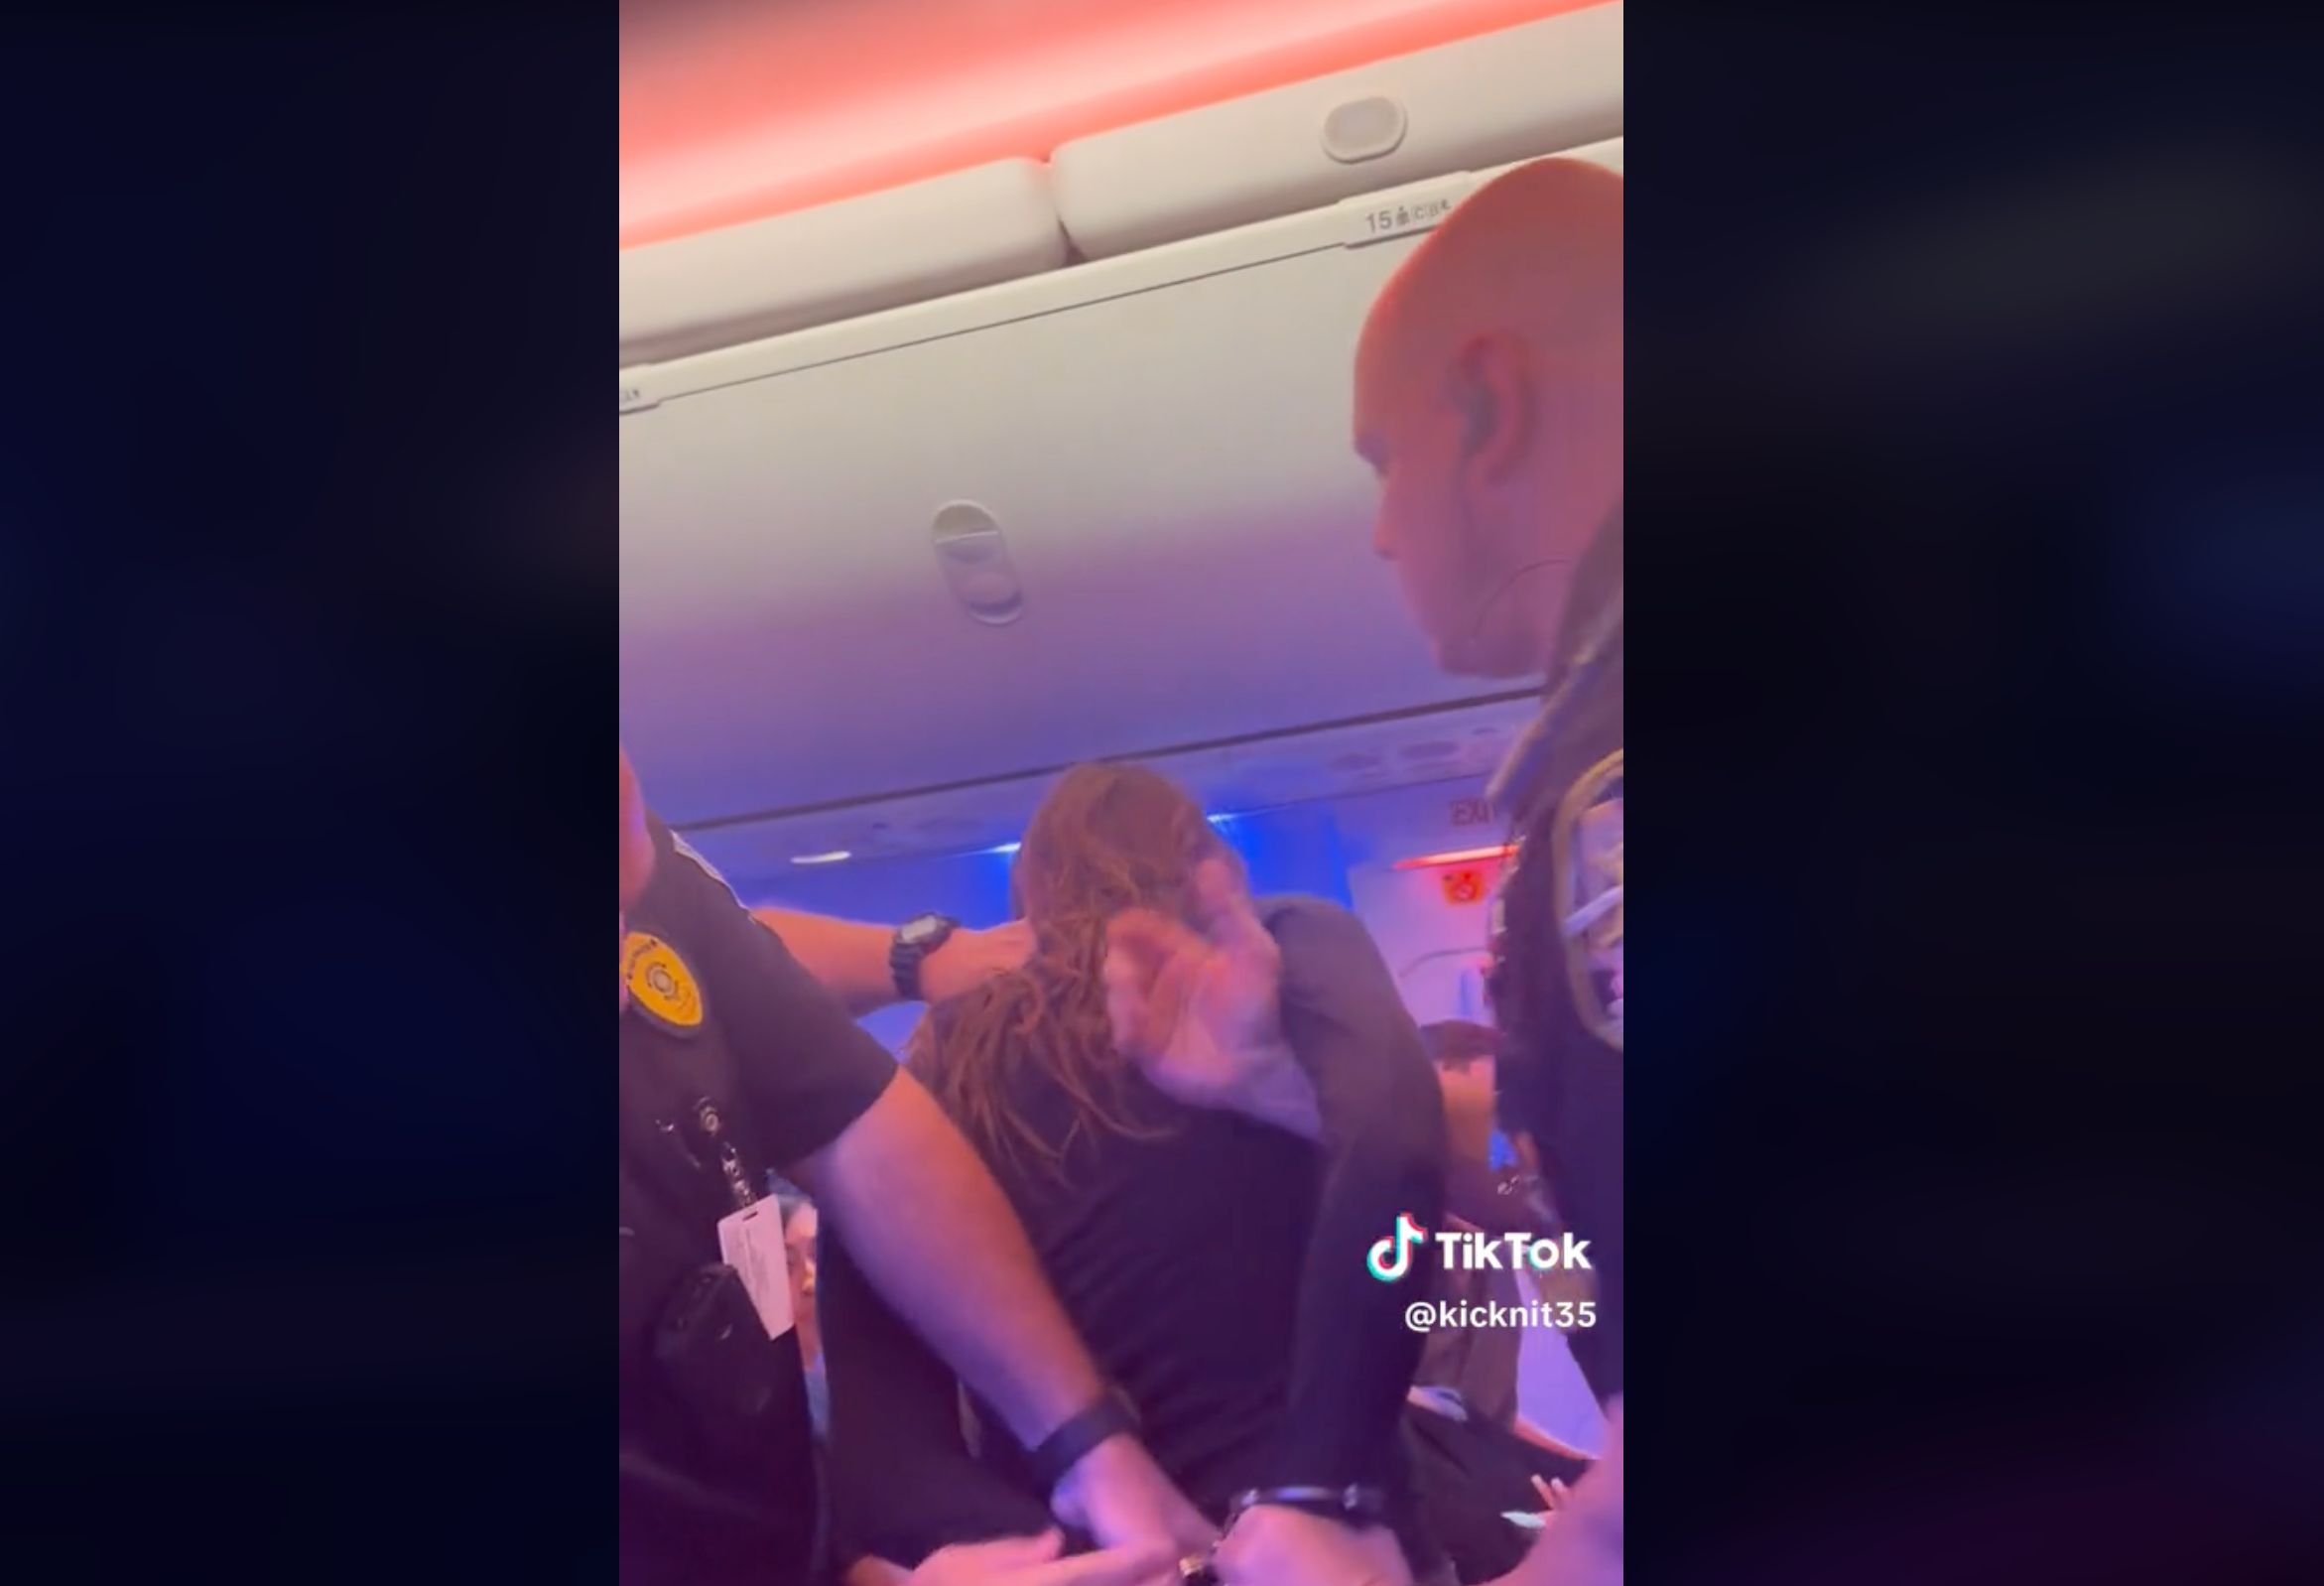 The woman was eventually handcuffed